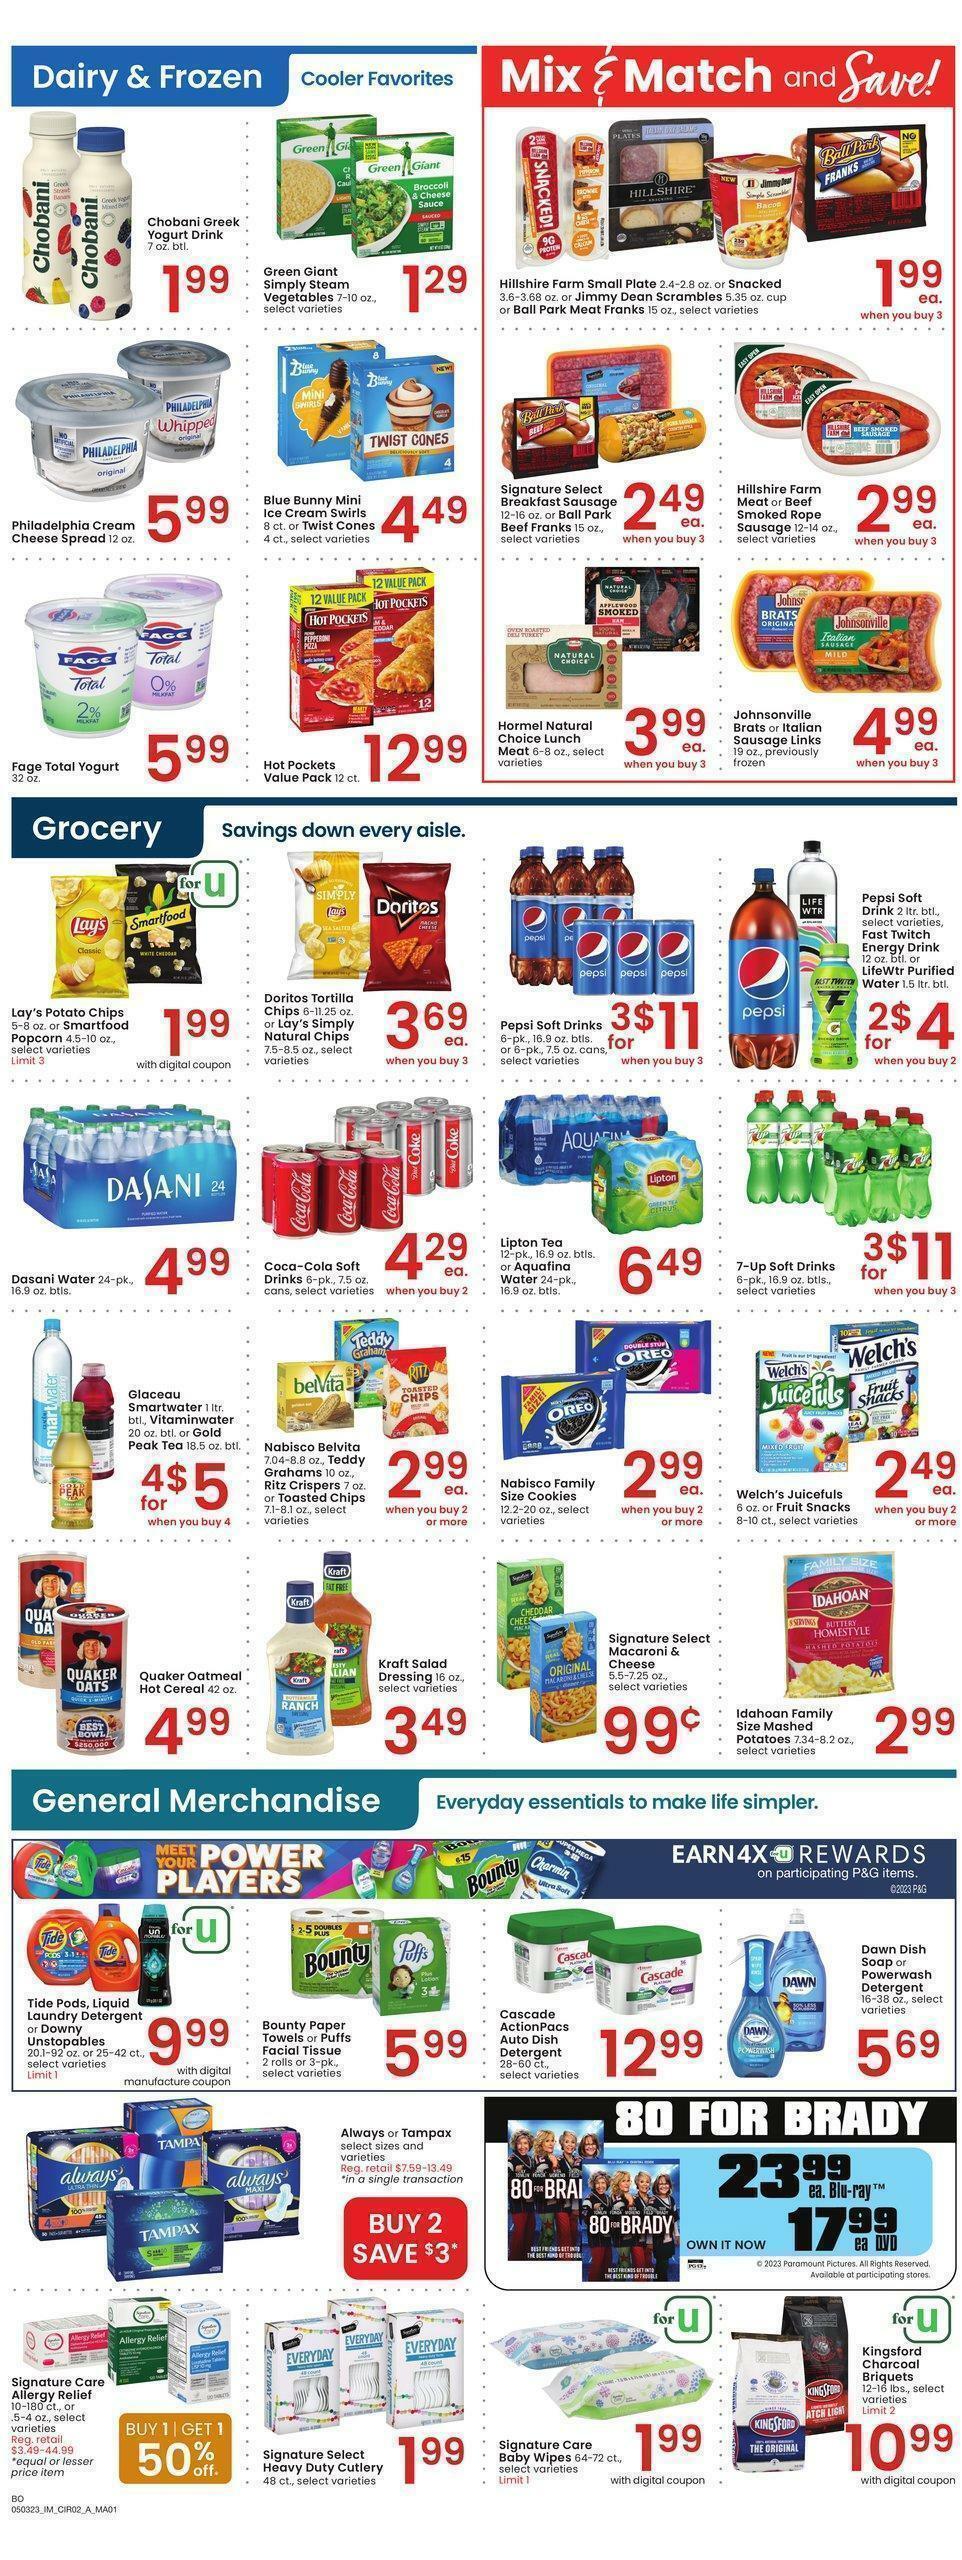 Albertsons Weekly Ad from May 3